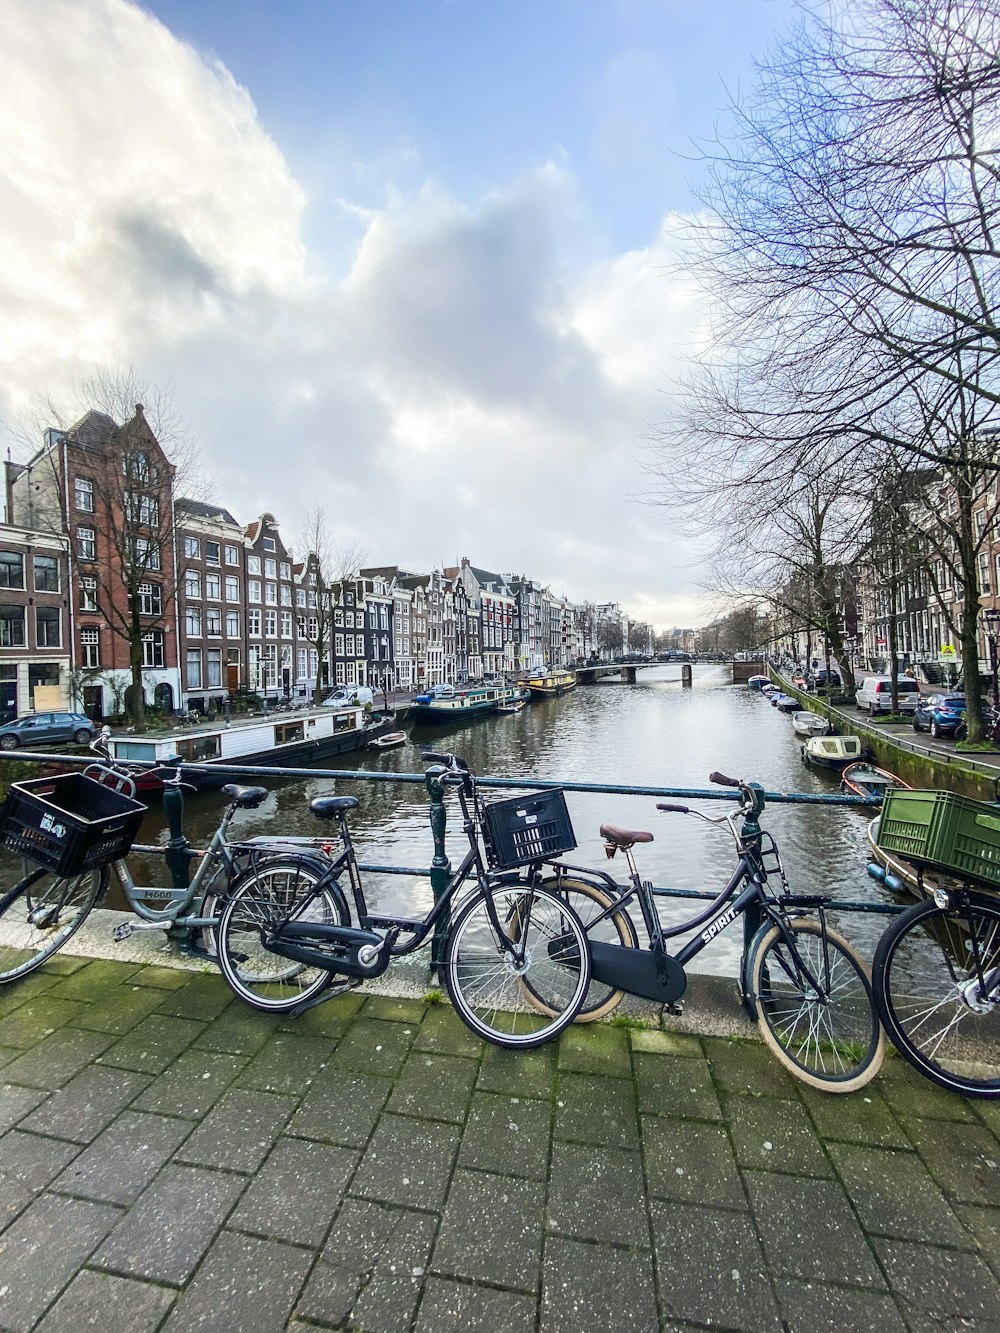 bicycles parked beside body of water near buildings during daytime